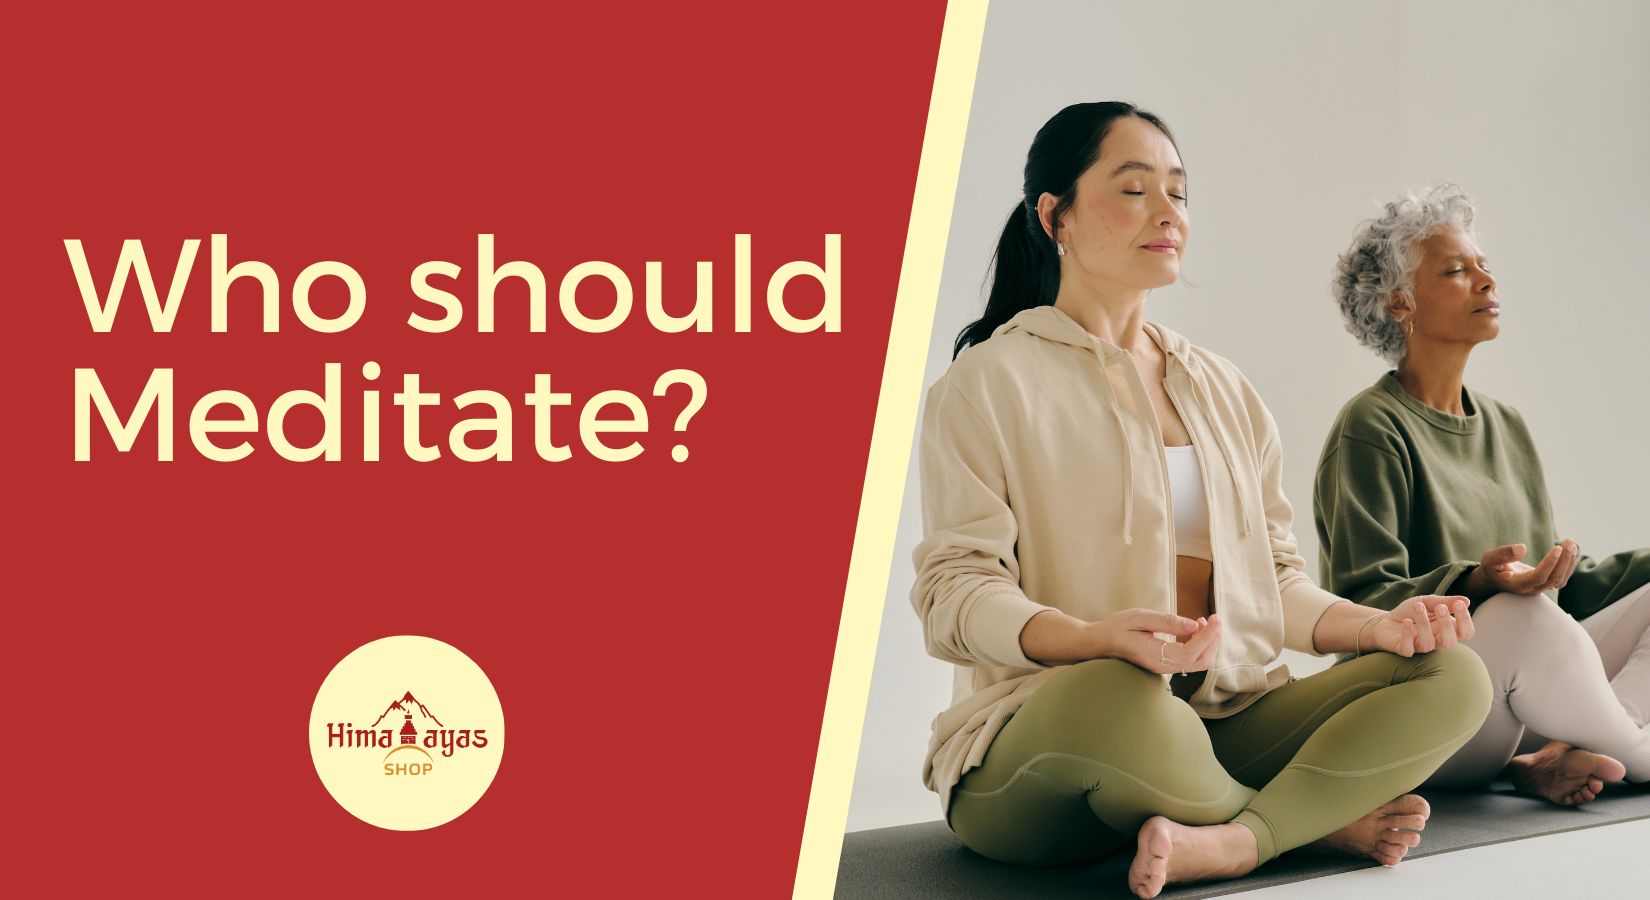 Who should Meditate?